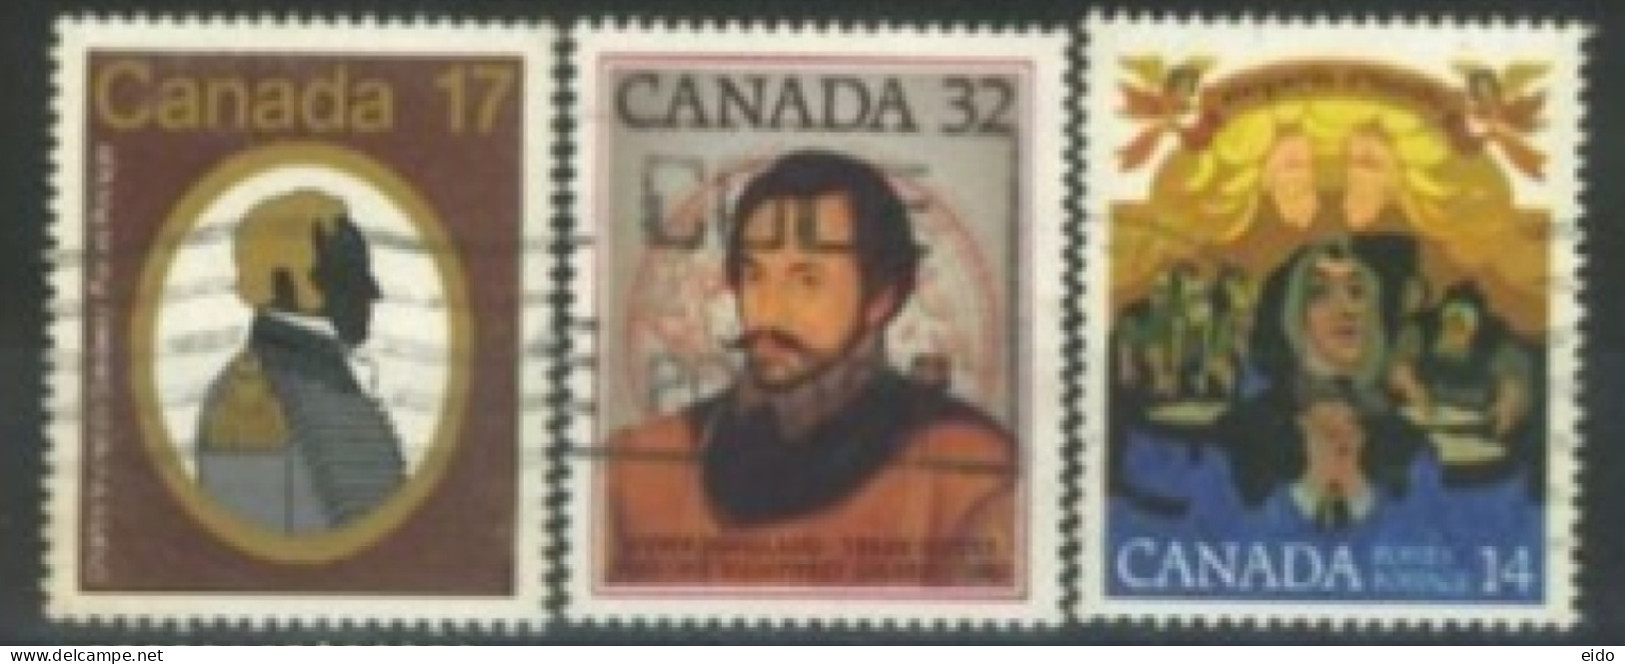 CANADA - 1978/83, MARGUERITE D'YOUVILLE COMMEMORATION, CHARLES MICHEL & SIR HUMPHREY. STAMPS SET OF 3, USED. - Oblitérés